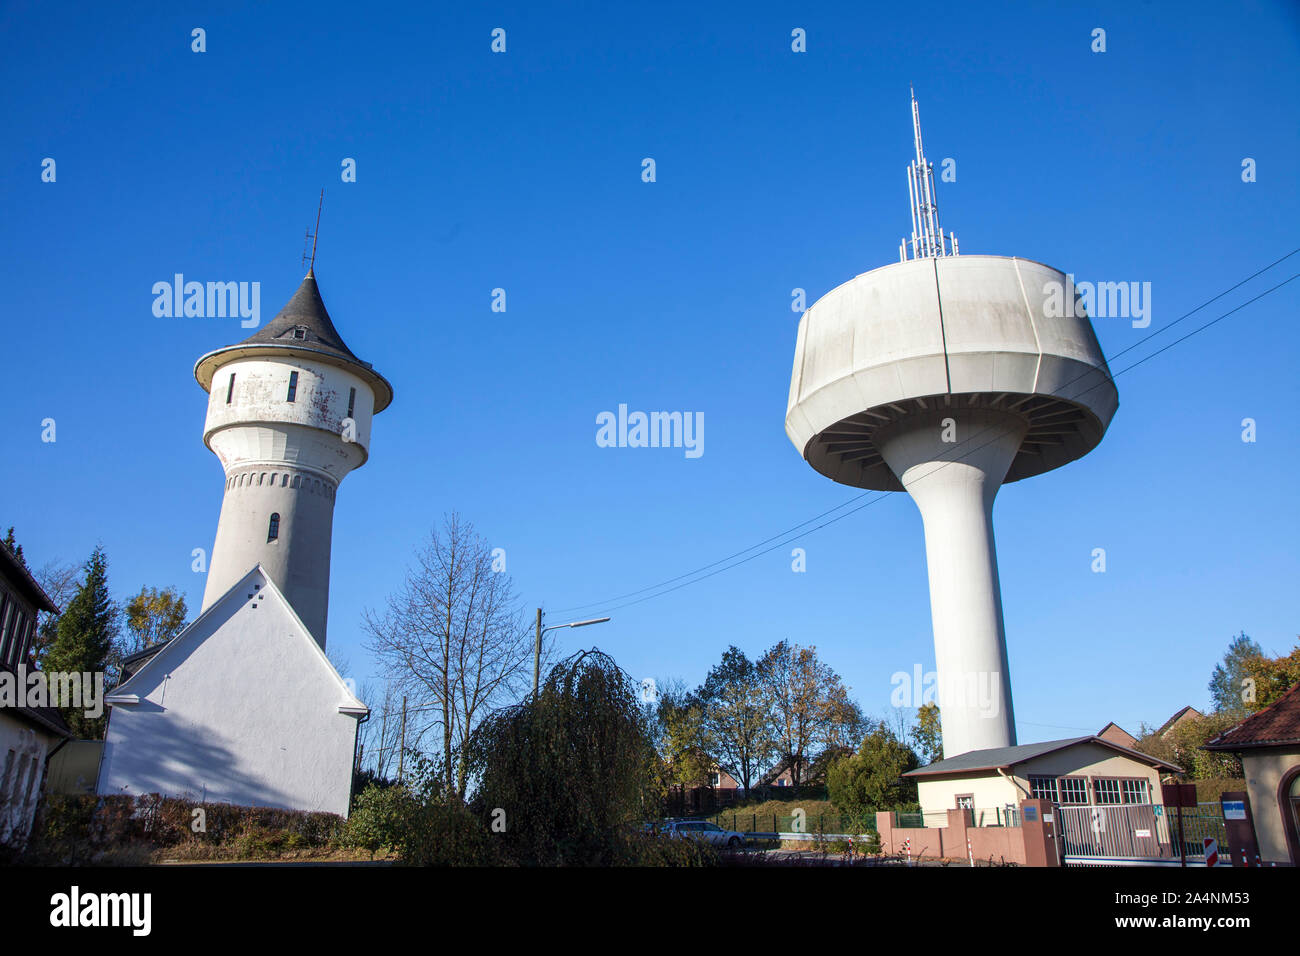 The old Hatzfeld water tower, and the new water tower, on the right, in Wuppertal Barmen, disused water tower for water supply, Stock Photo